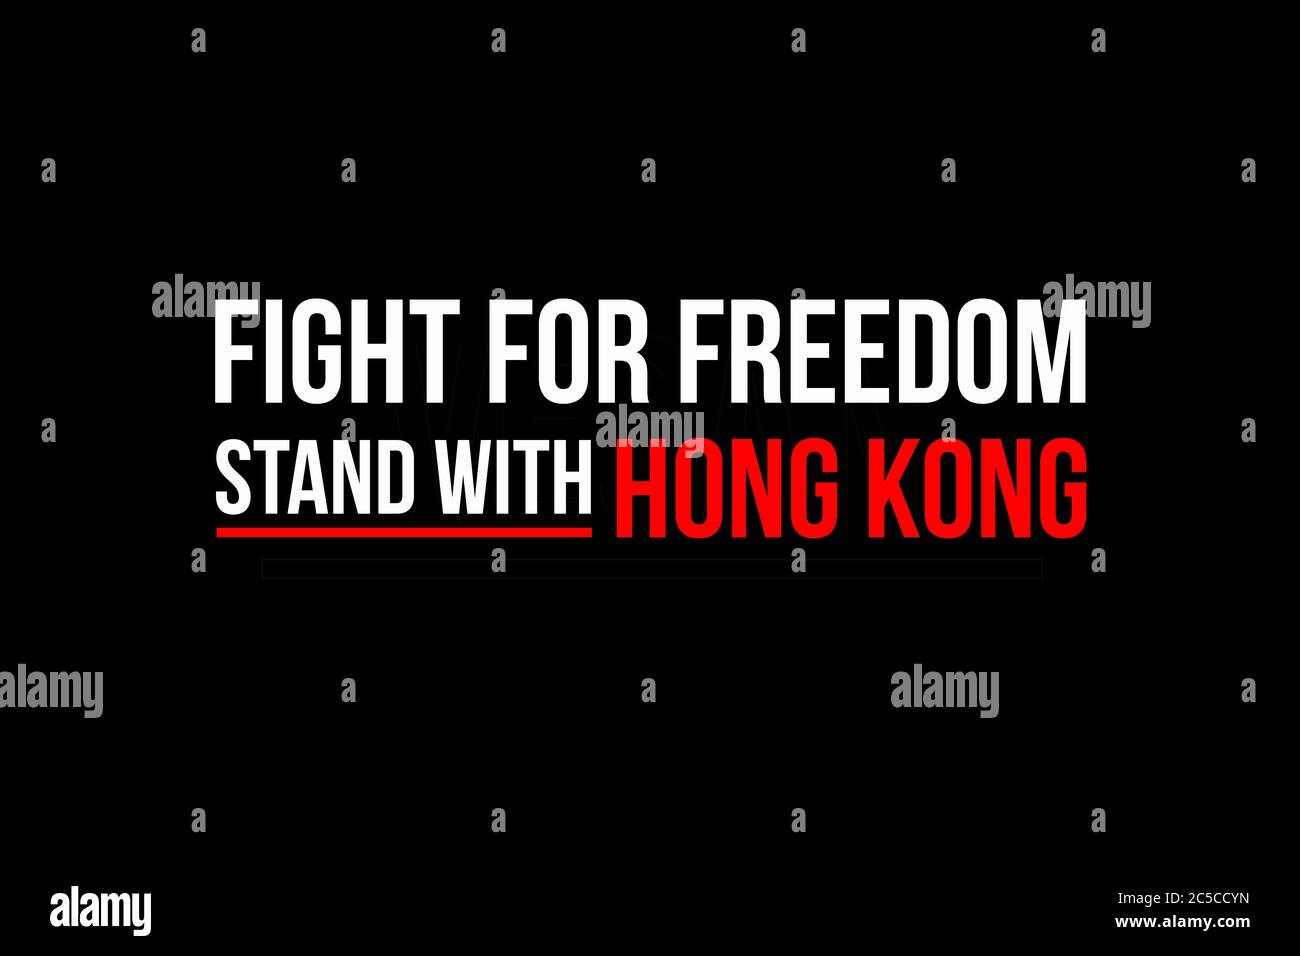 Stand with Hong Kong. Fight for freedom. Join Declaration defend freedom and autonomy. Logo with white and red words Stock Photo